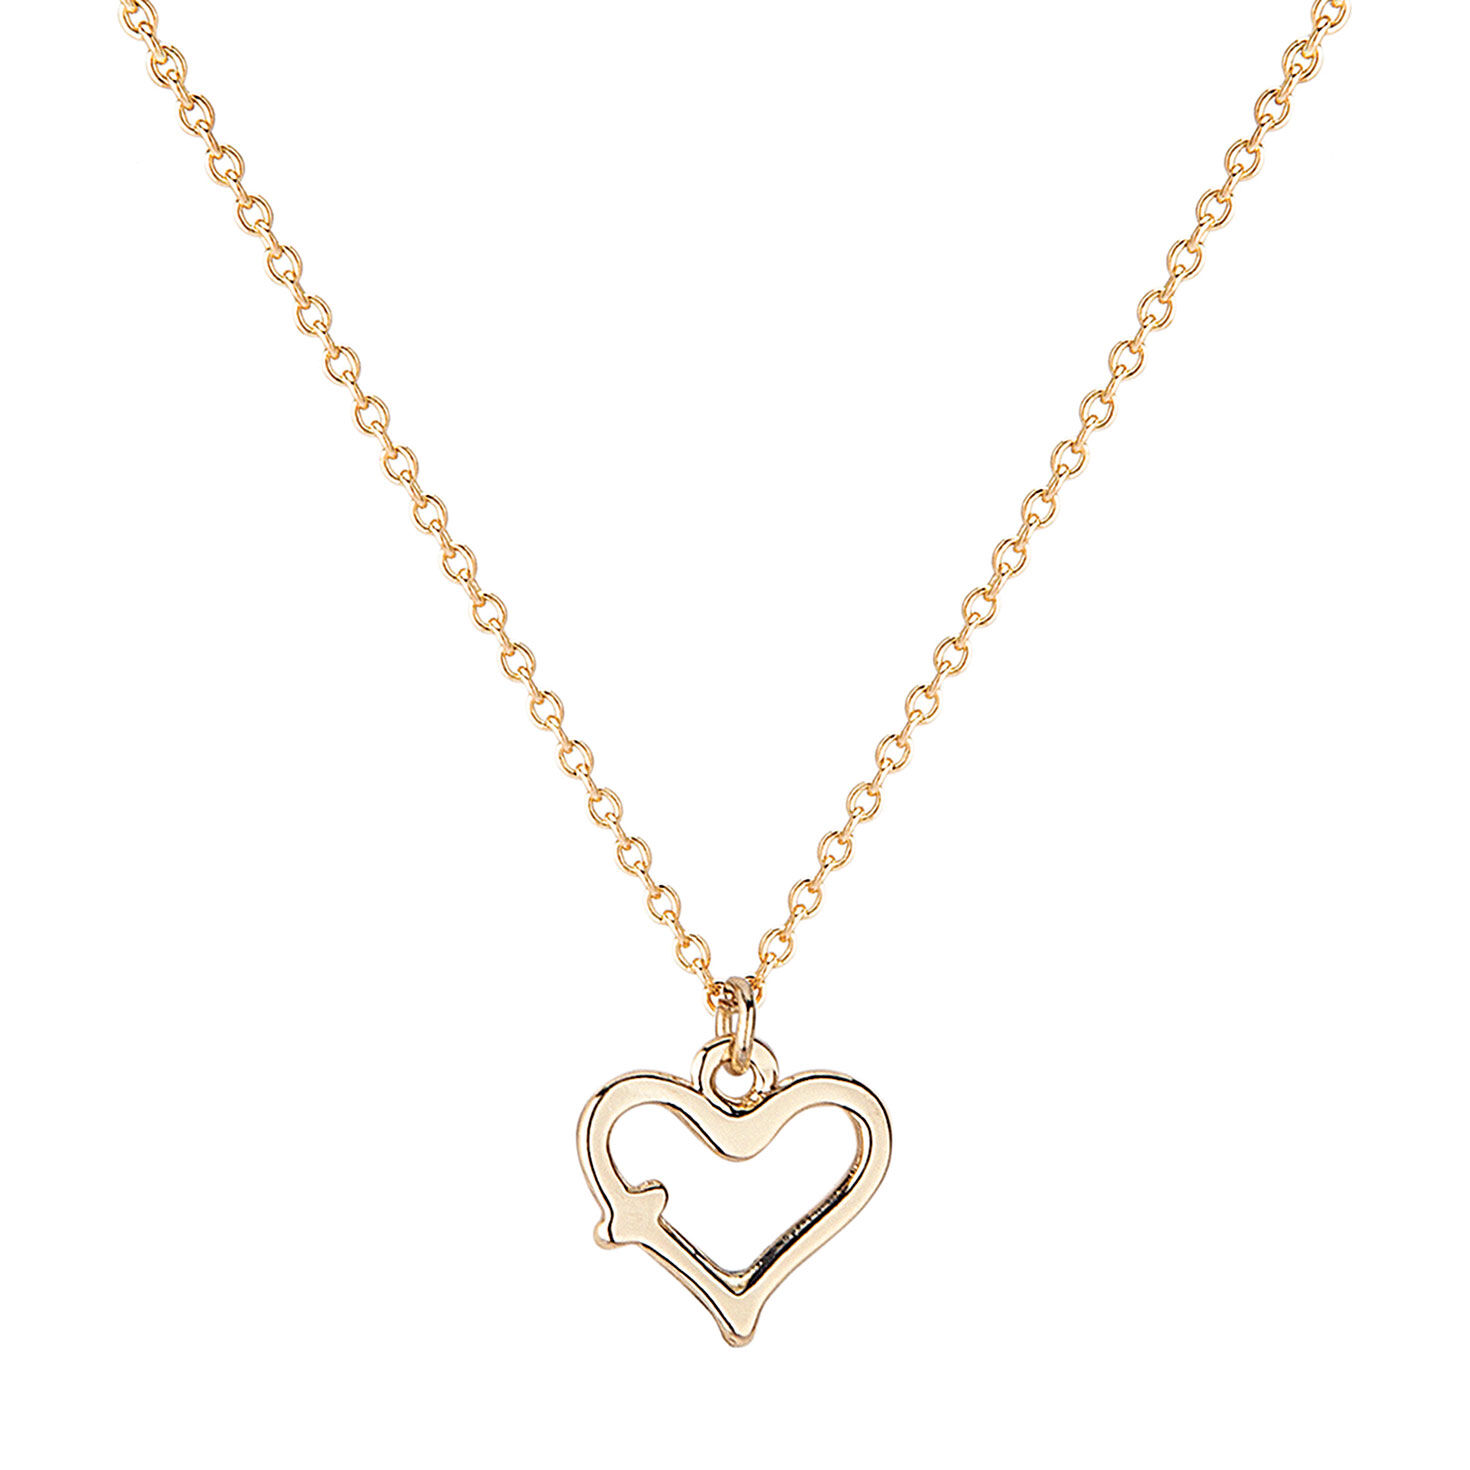 Roman Gold Cross Heart Necklace for Kids for only USD 12.99 | Hallmark